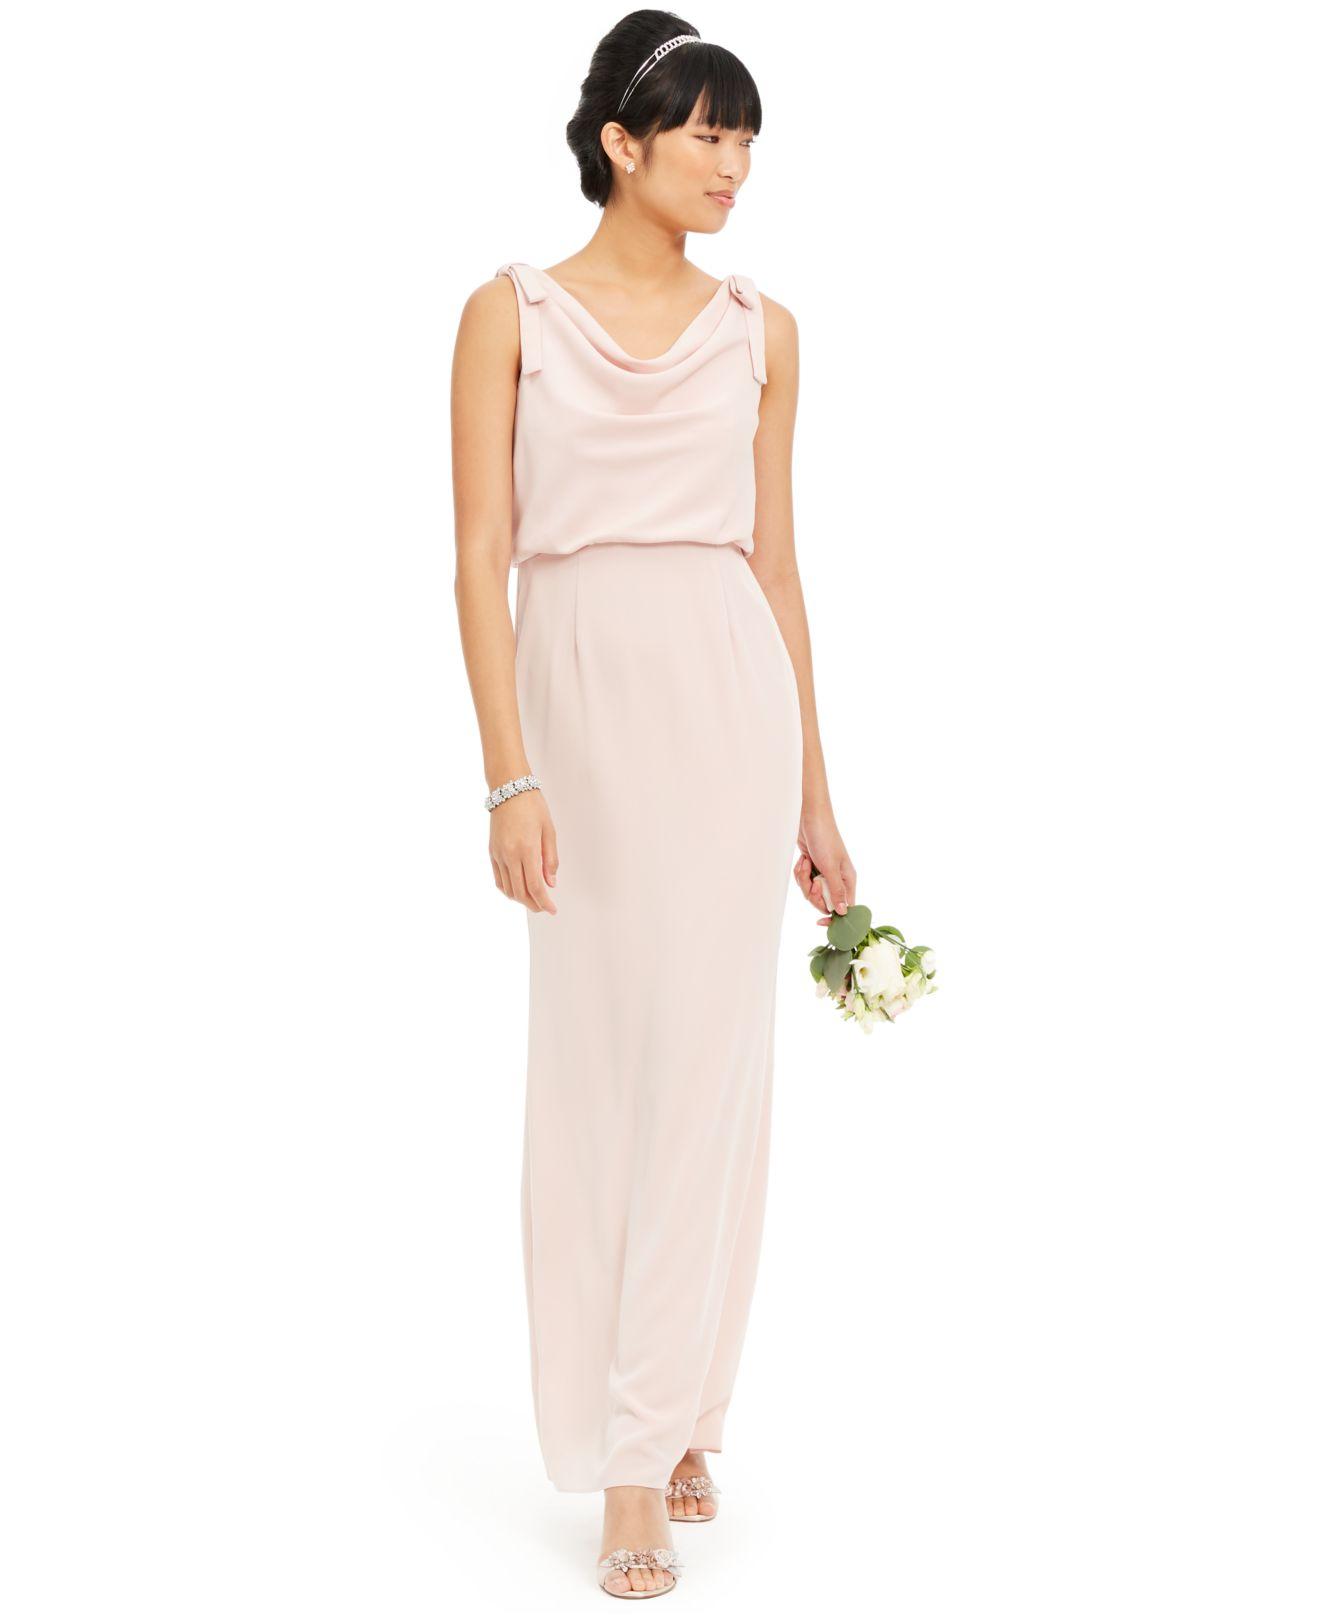 Adrianna Papell Synthetic Blouson Cowlneck Gown in Blush (Pink) - Lyst